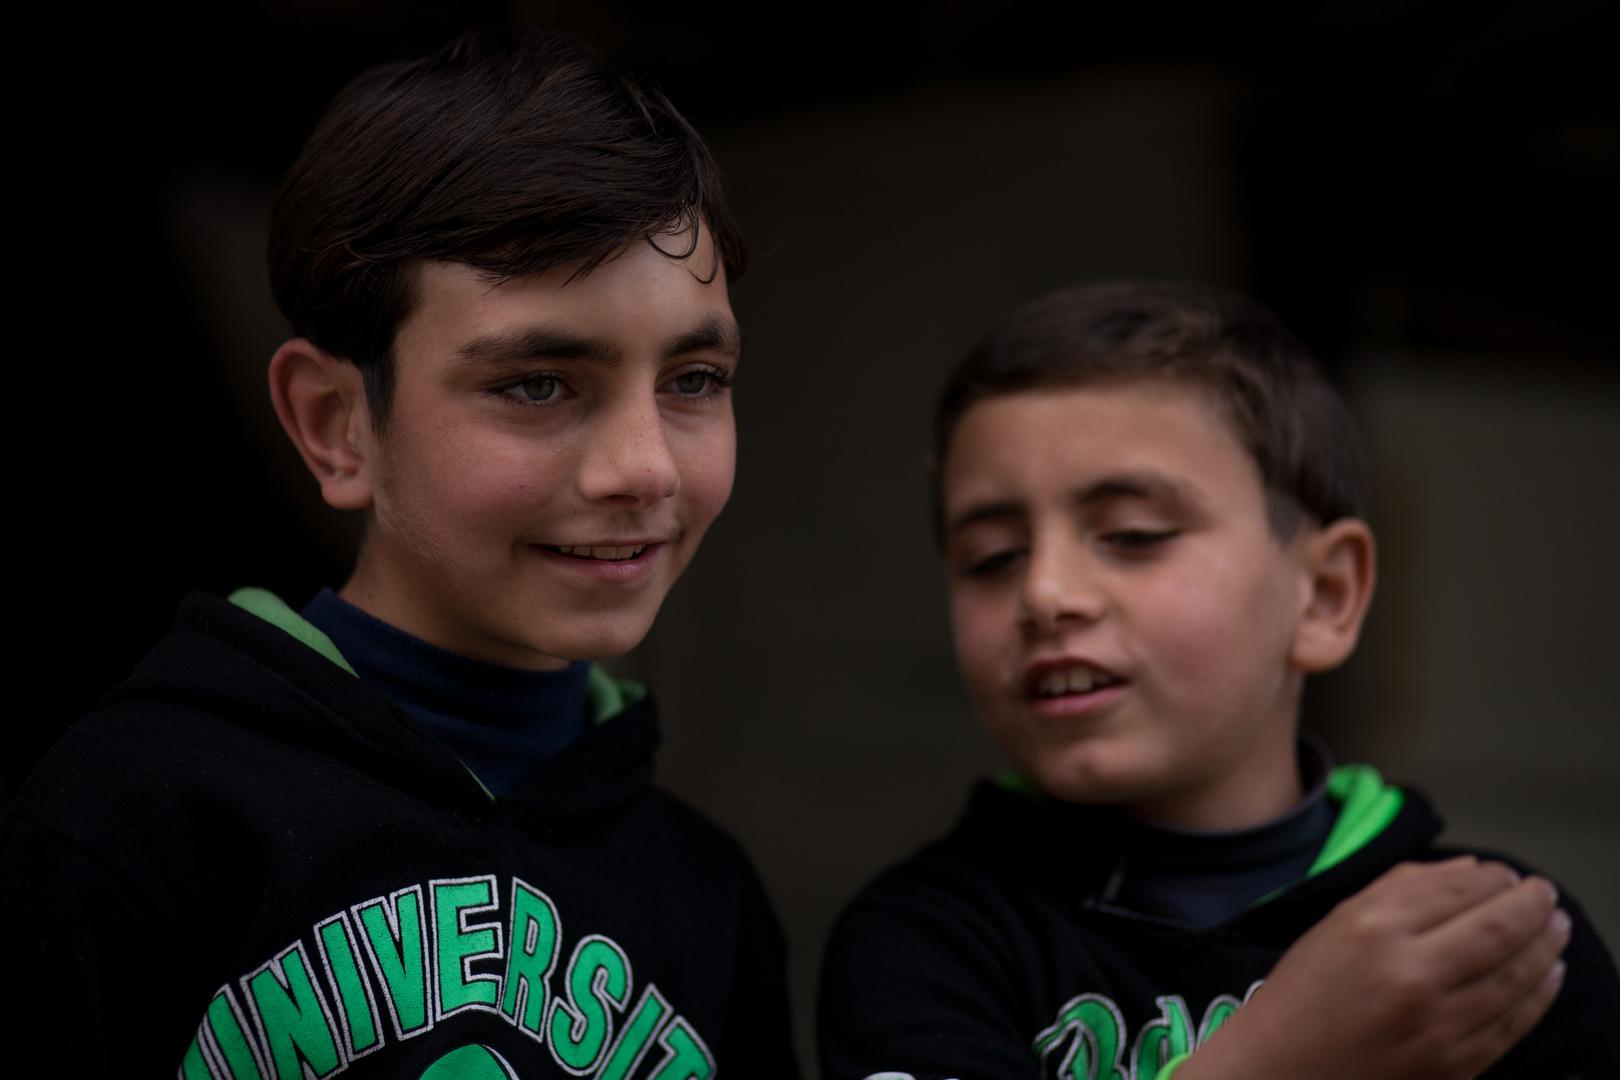 Kawthar's boys, 13-year-old Wa'el and 7-year-old Fouad, have also struggled to enroll in school in Lebanon.